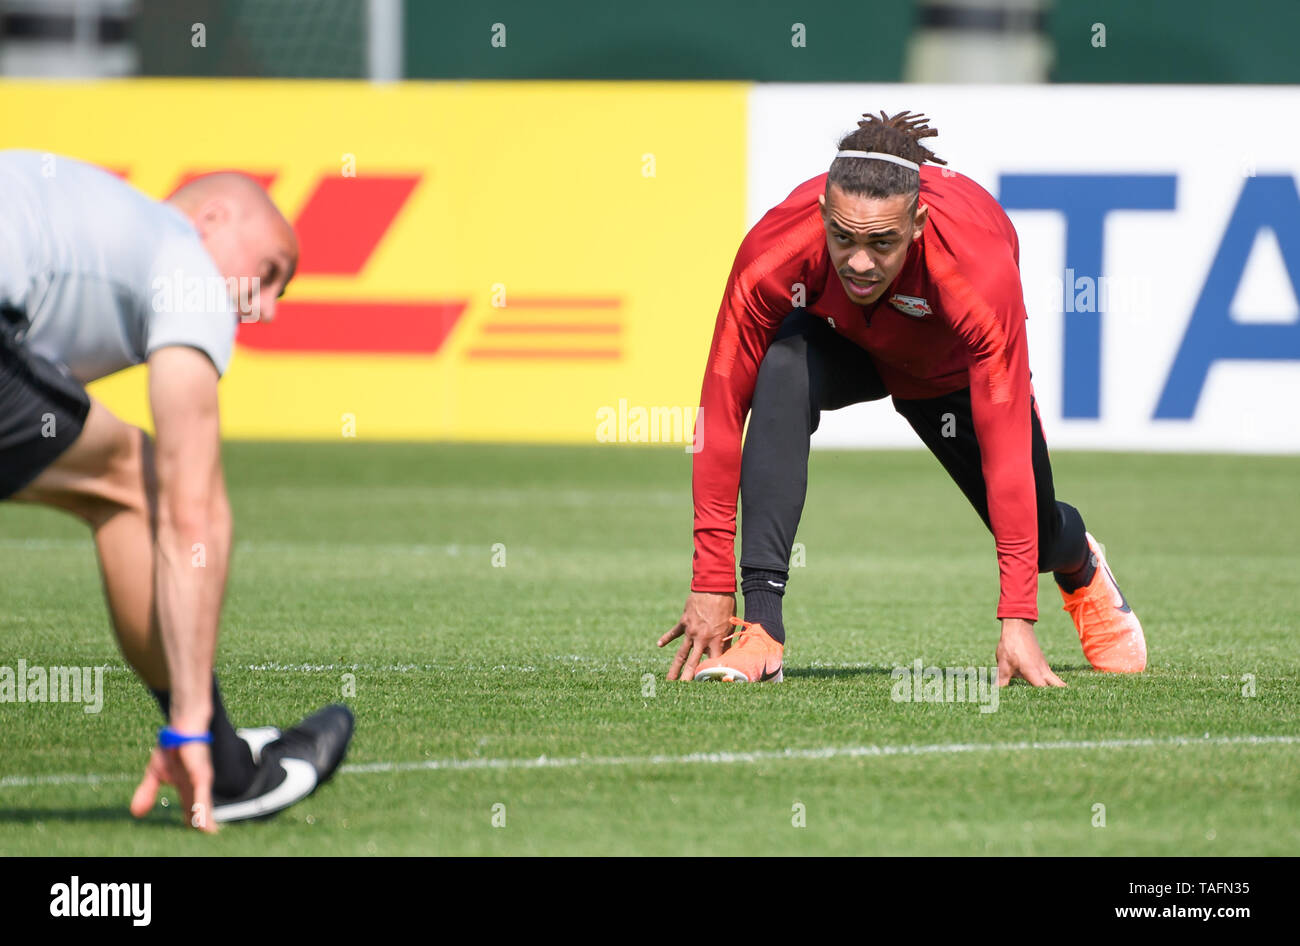 Berlin, Germany. 24th May, 2019. Leipzig's Yussuf Poulsen (R) attends a training session for the upcoming German Cup final match between RB Leipzig and FC Bayern Munich in Leipzig, Germany, on May 24, 2019. Credit: Kevin Voigt/Xinhua/Alamy Live News Stock Photo